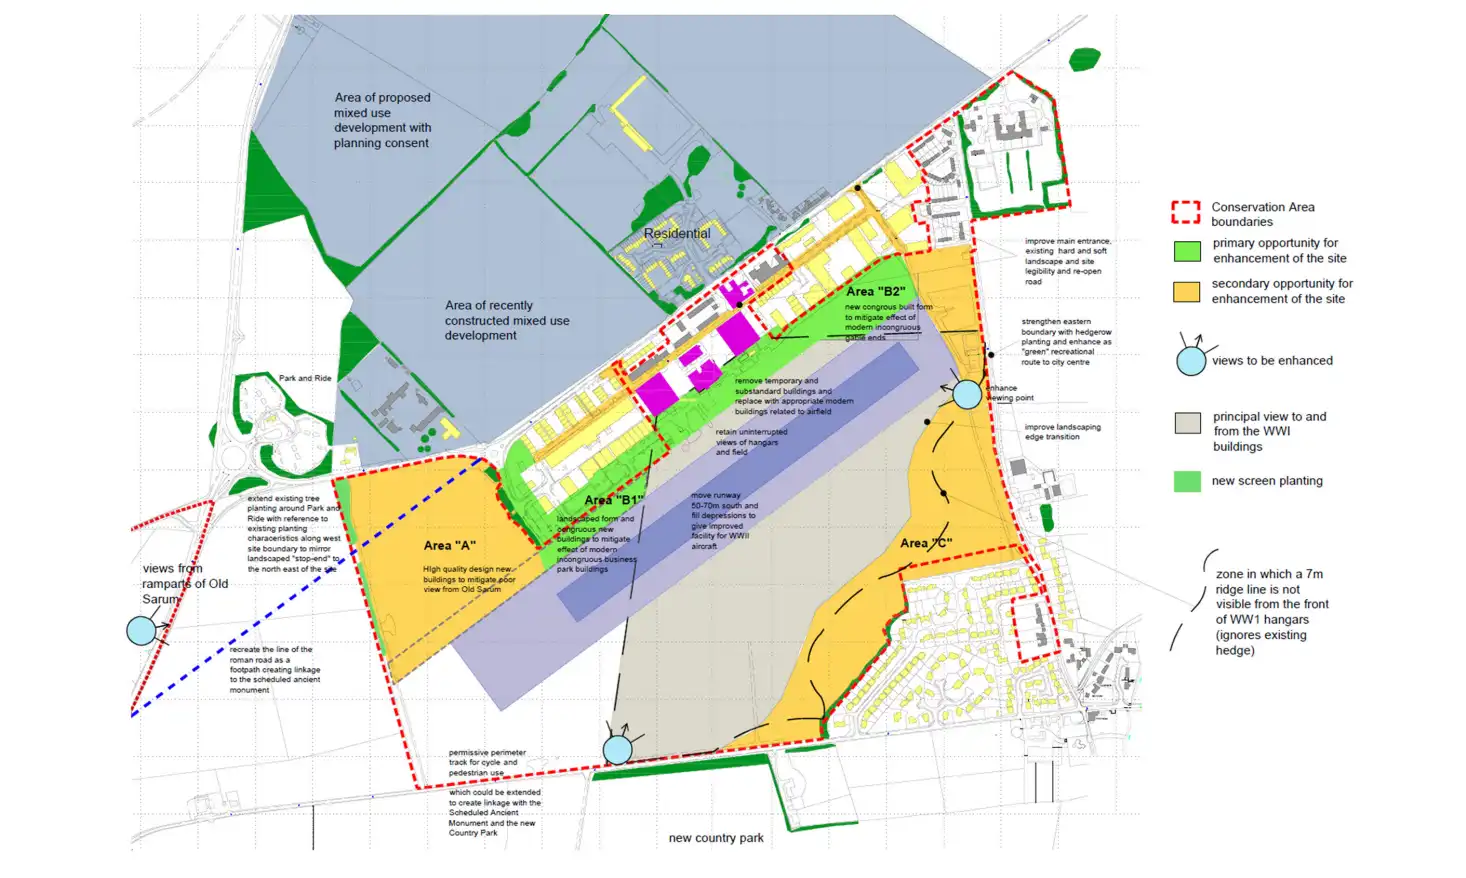 How the site has been split for development in the new application. Picture: Feilden + Mawson/Wiltshire Council